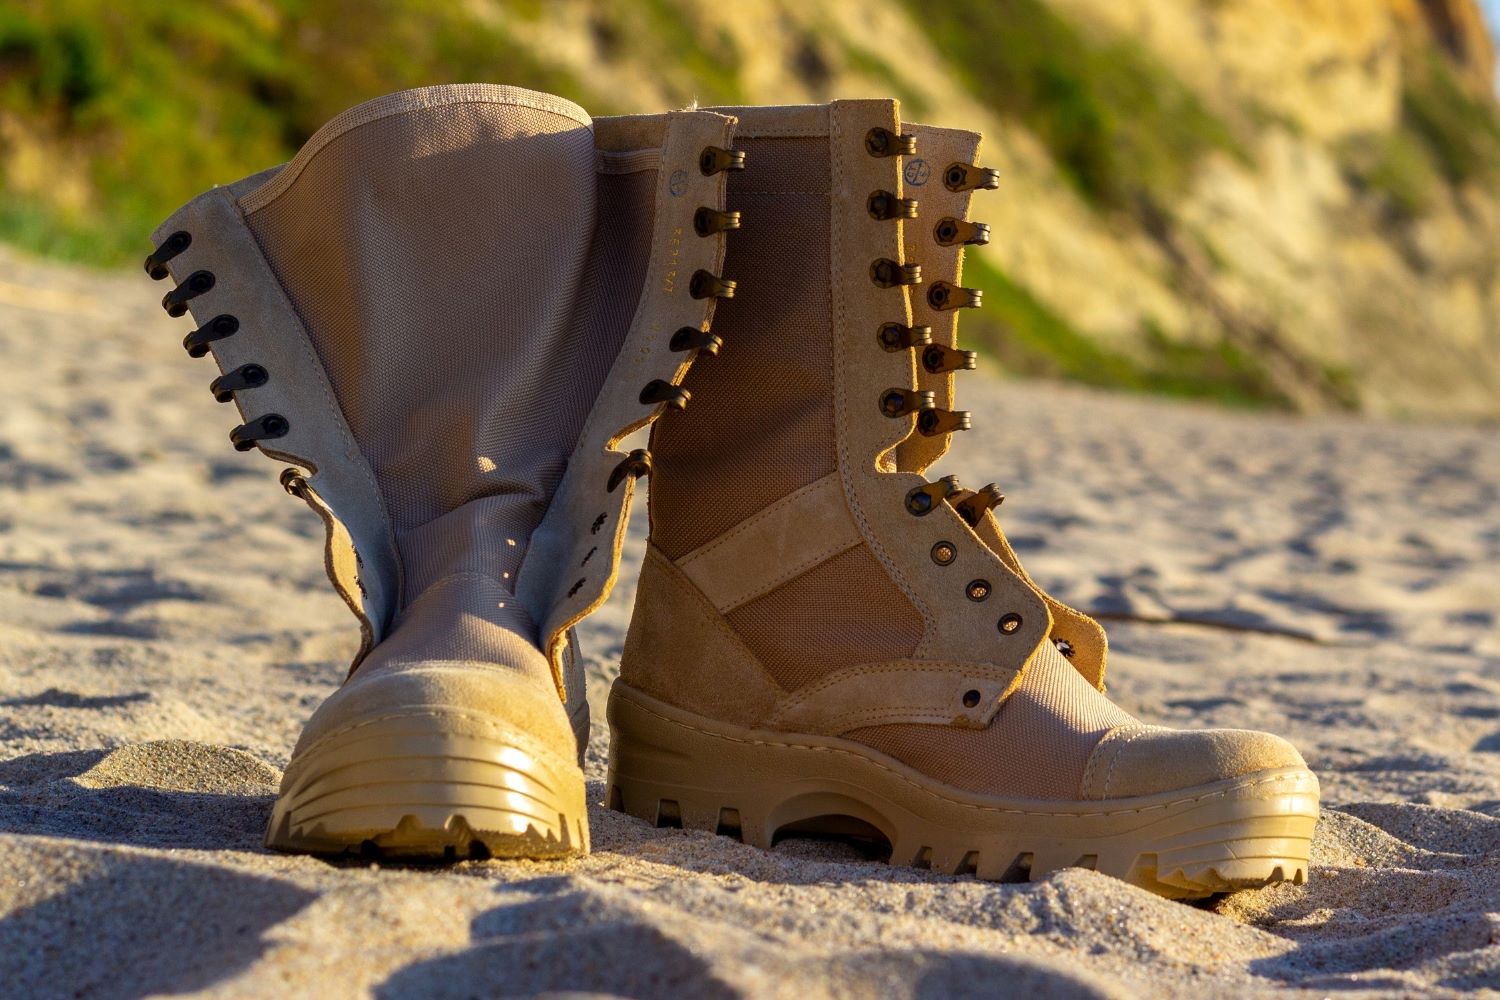 Maelstrom Boots - Tactical Boots and Apparel